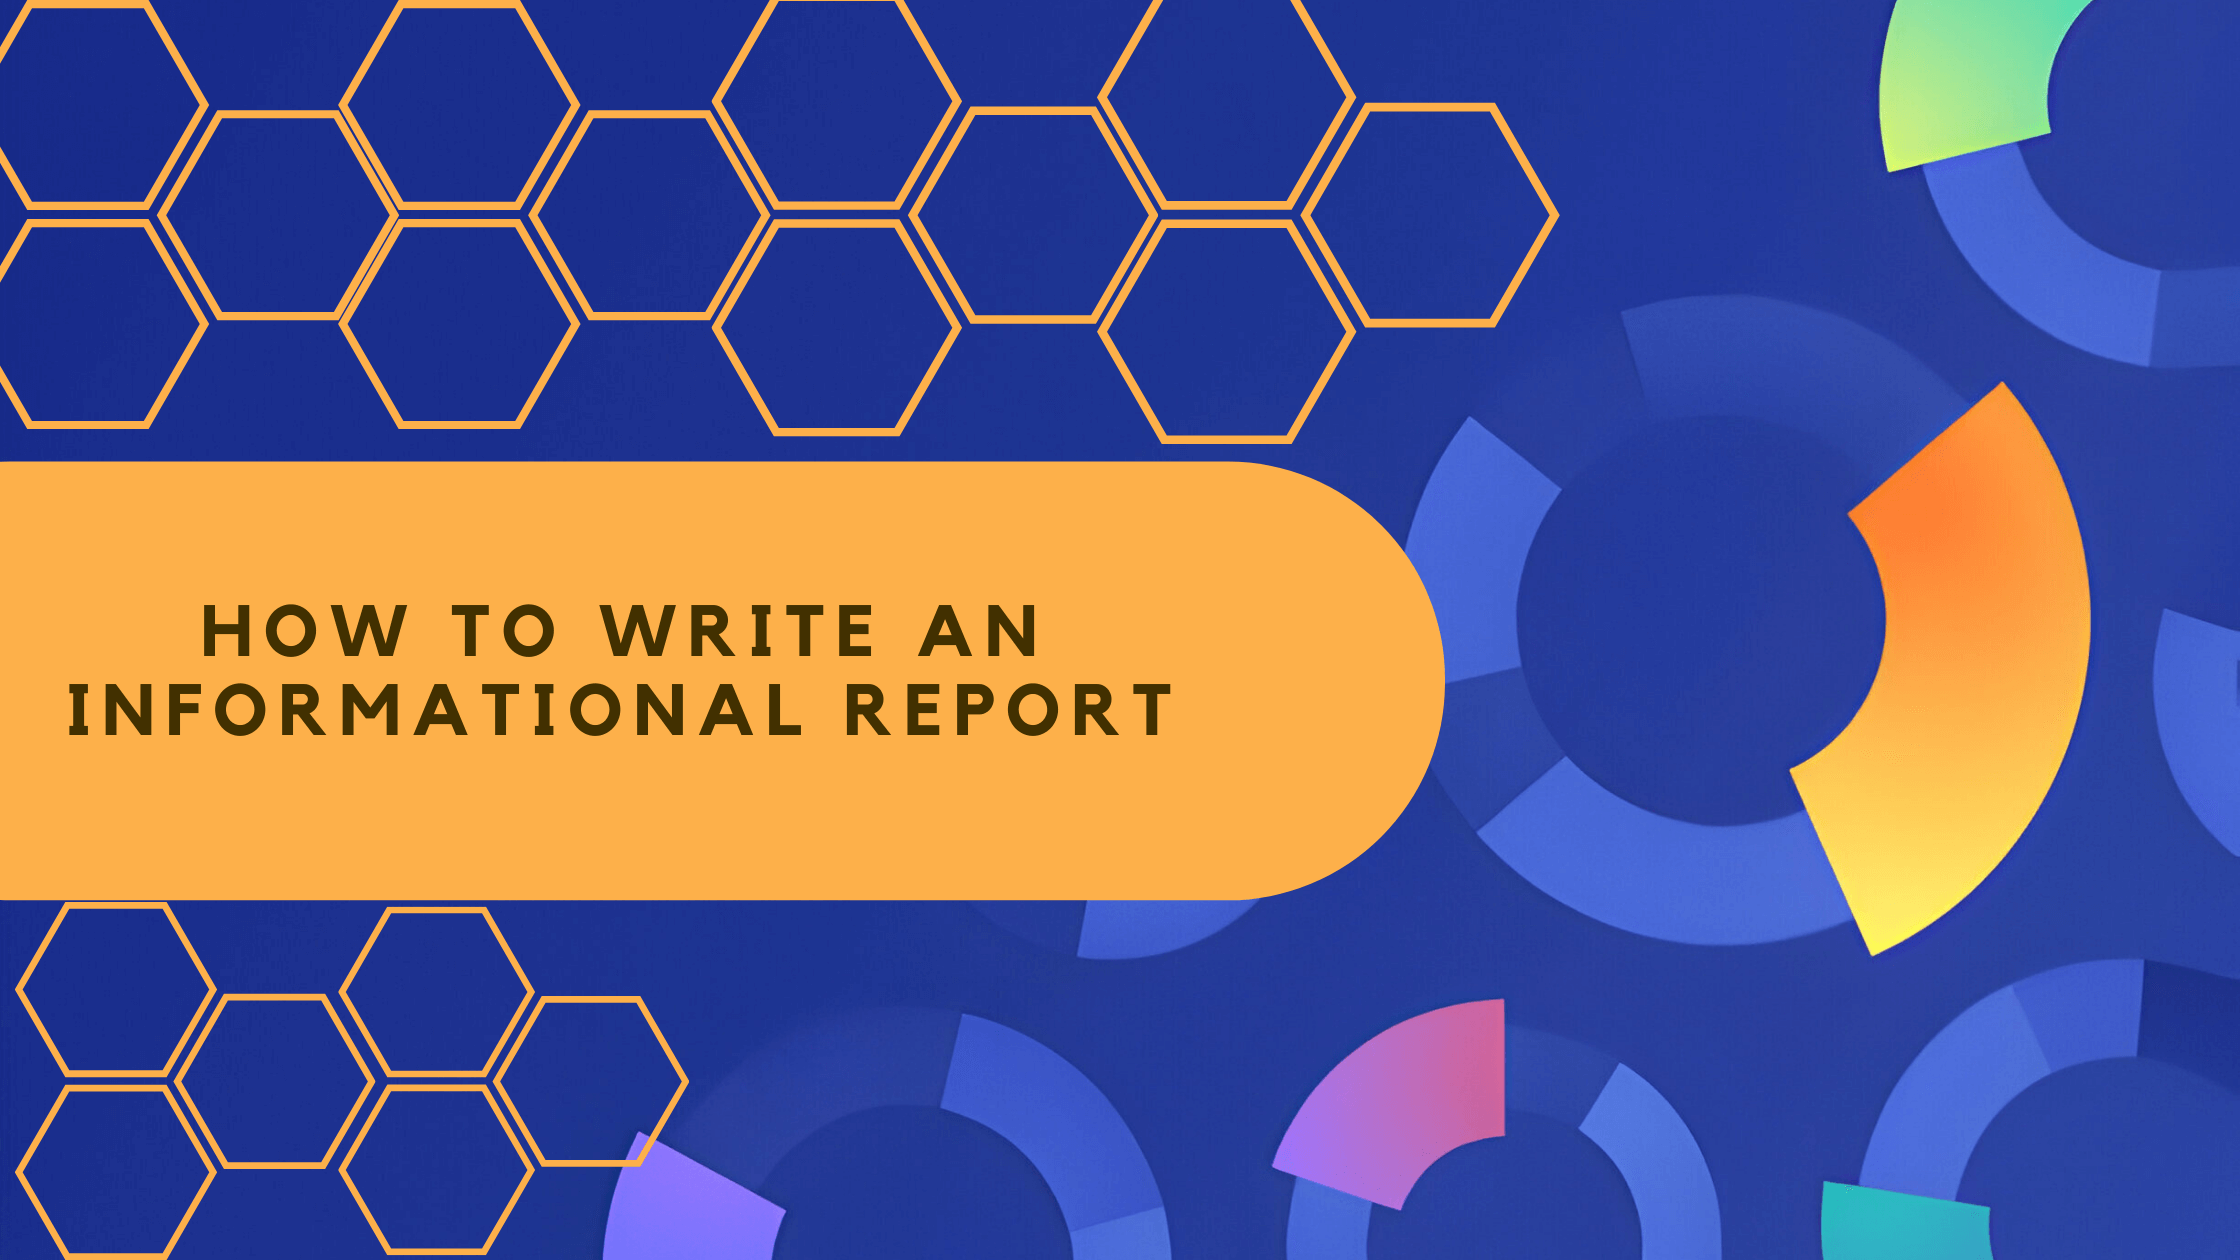 How to write an informational report